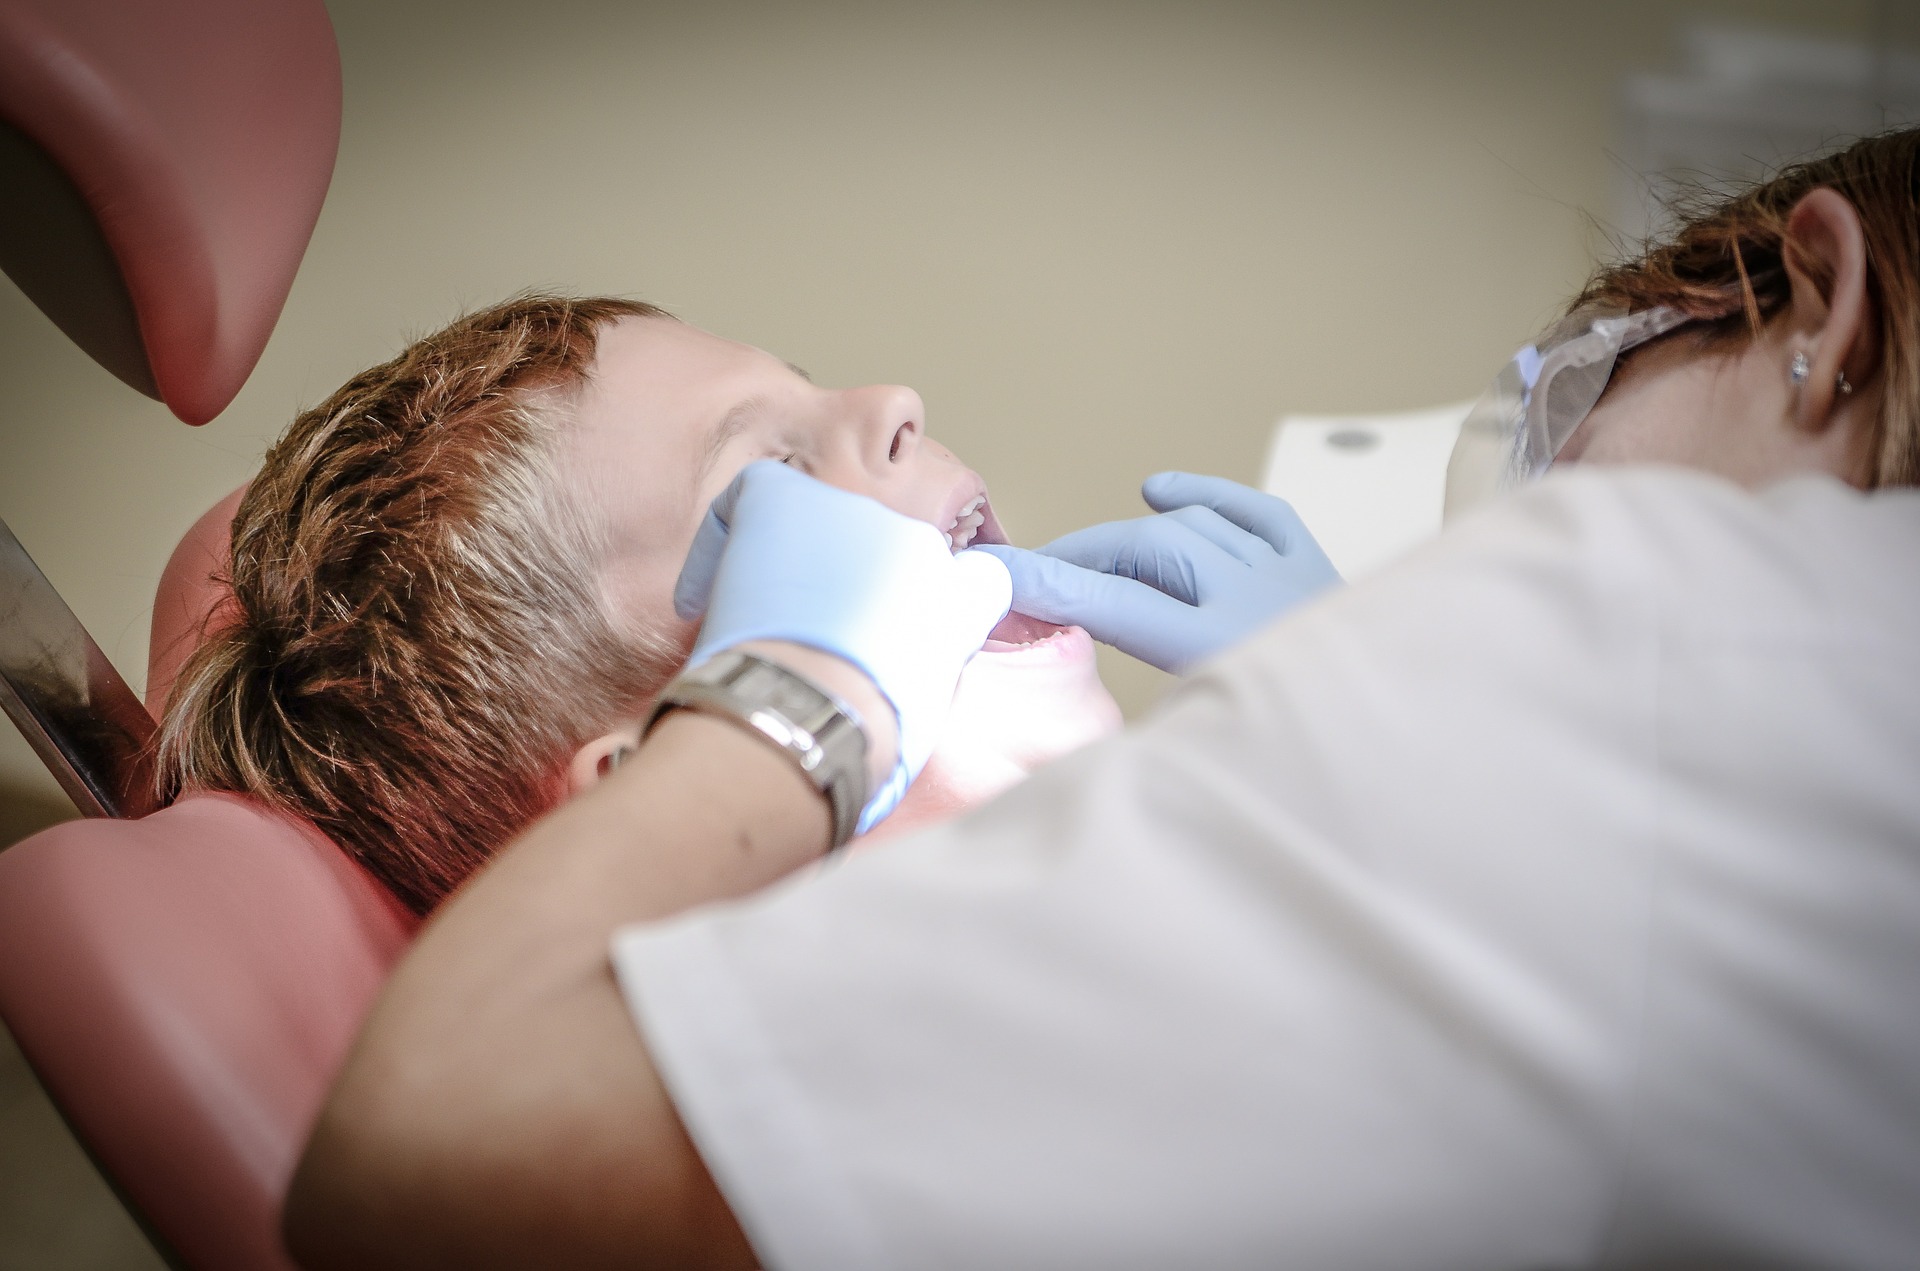 This image shows a young boy getting a dental checkup.